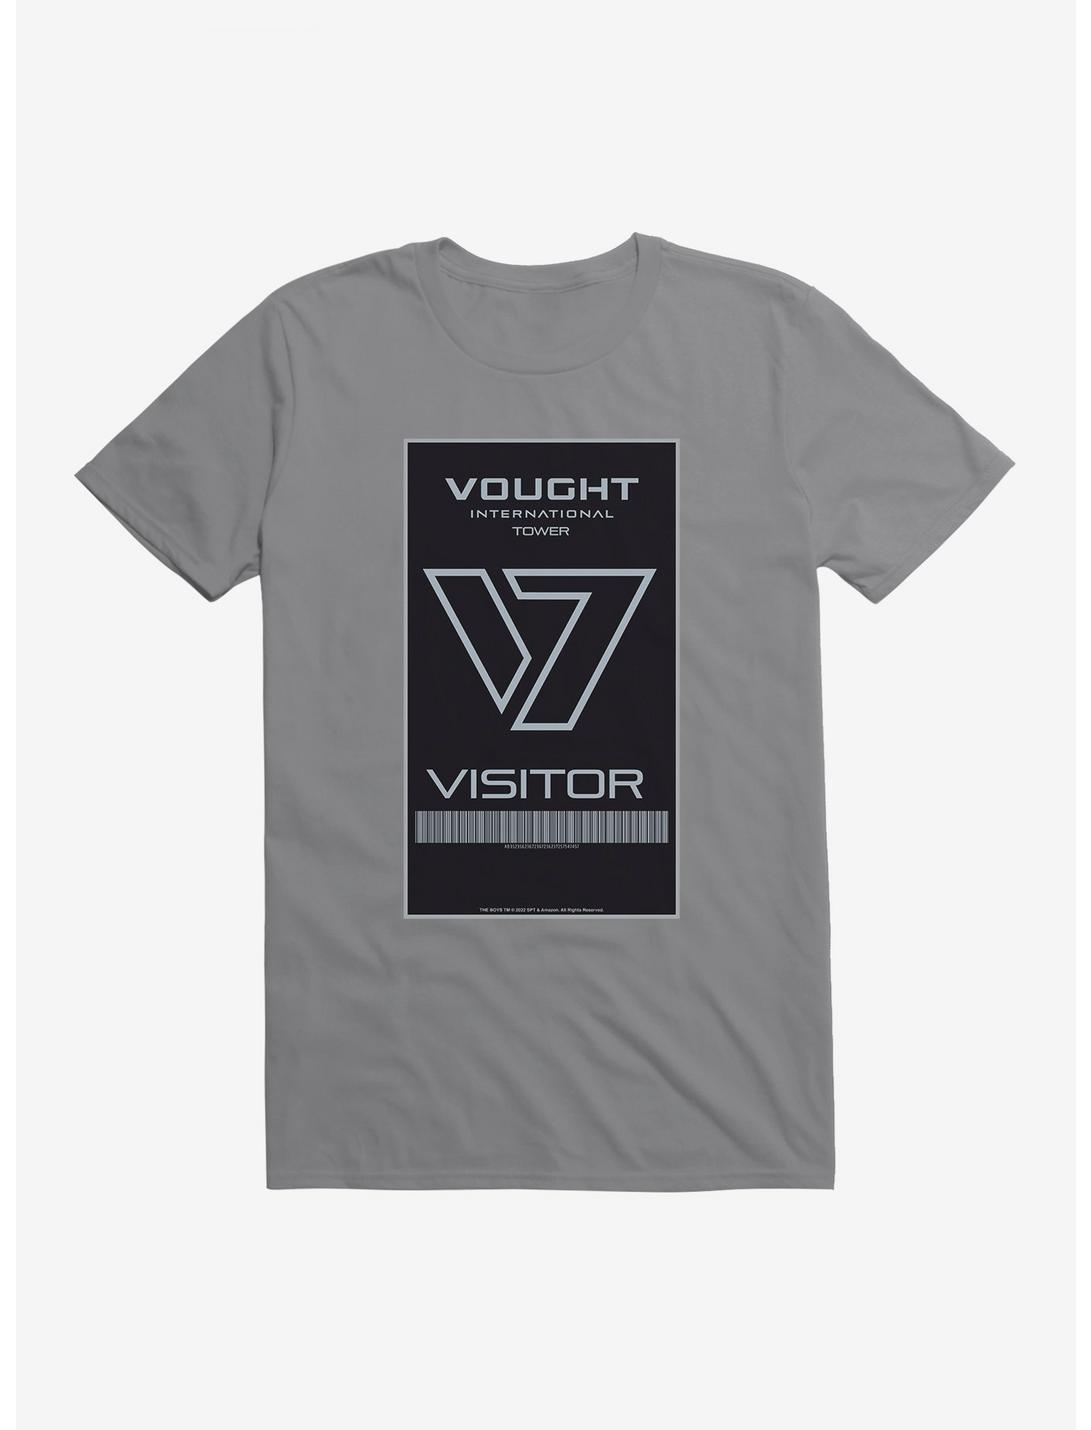 The Boys Vought Intl Tower Visitor Badge T-Shirt, , hi-res